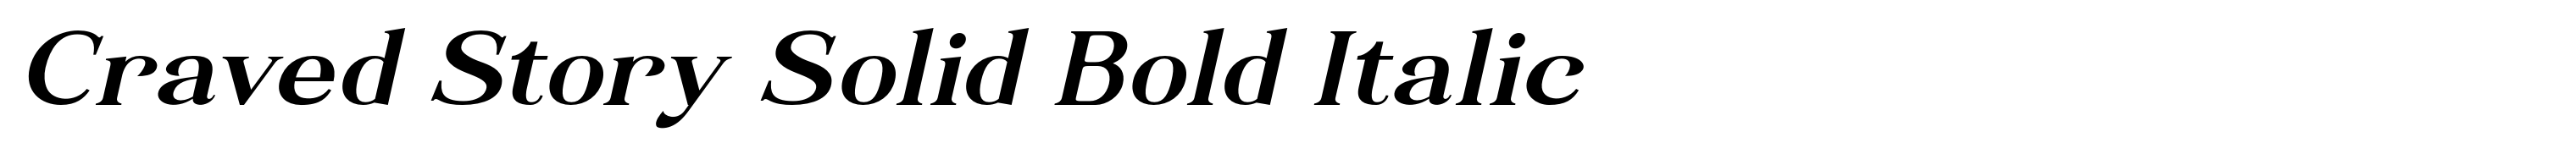 Craved Story Solid Bold Italic